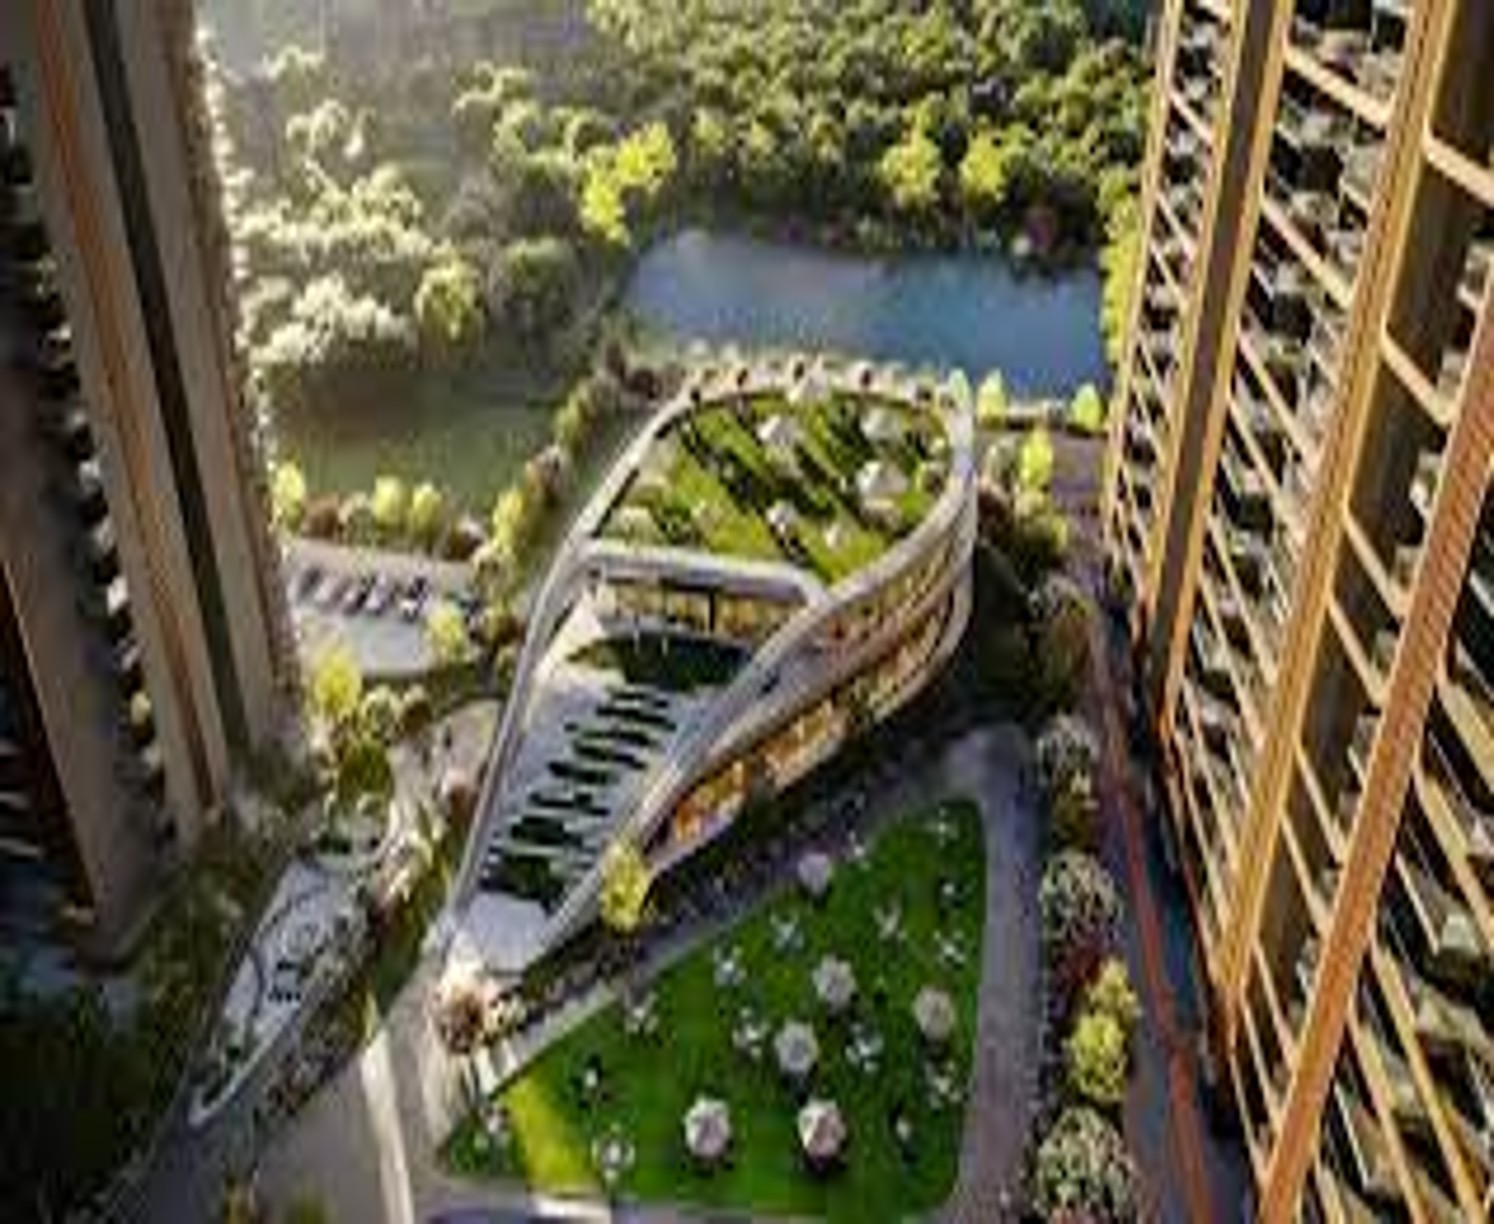  M3M Crown Sector 111 Gurgaon - Residential Projects